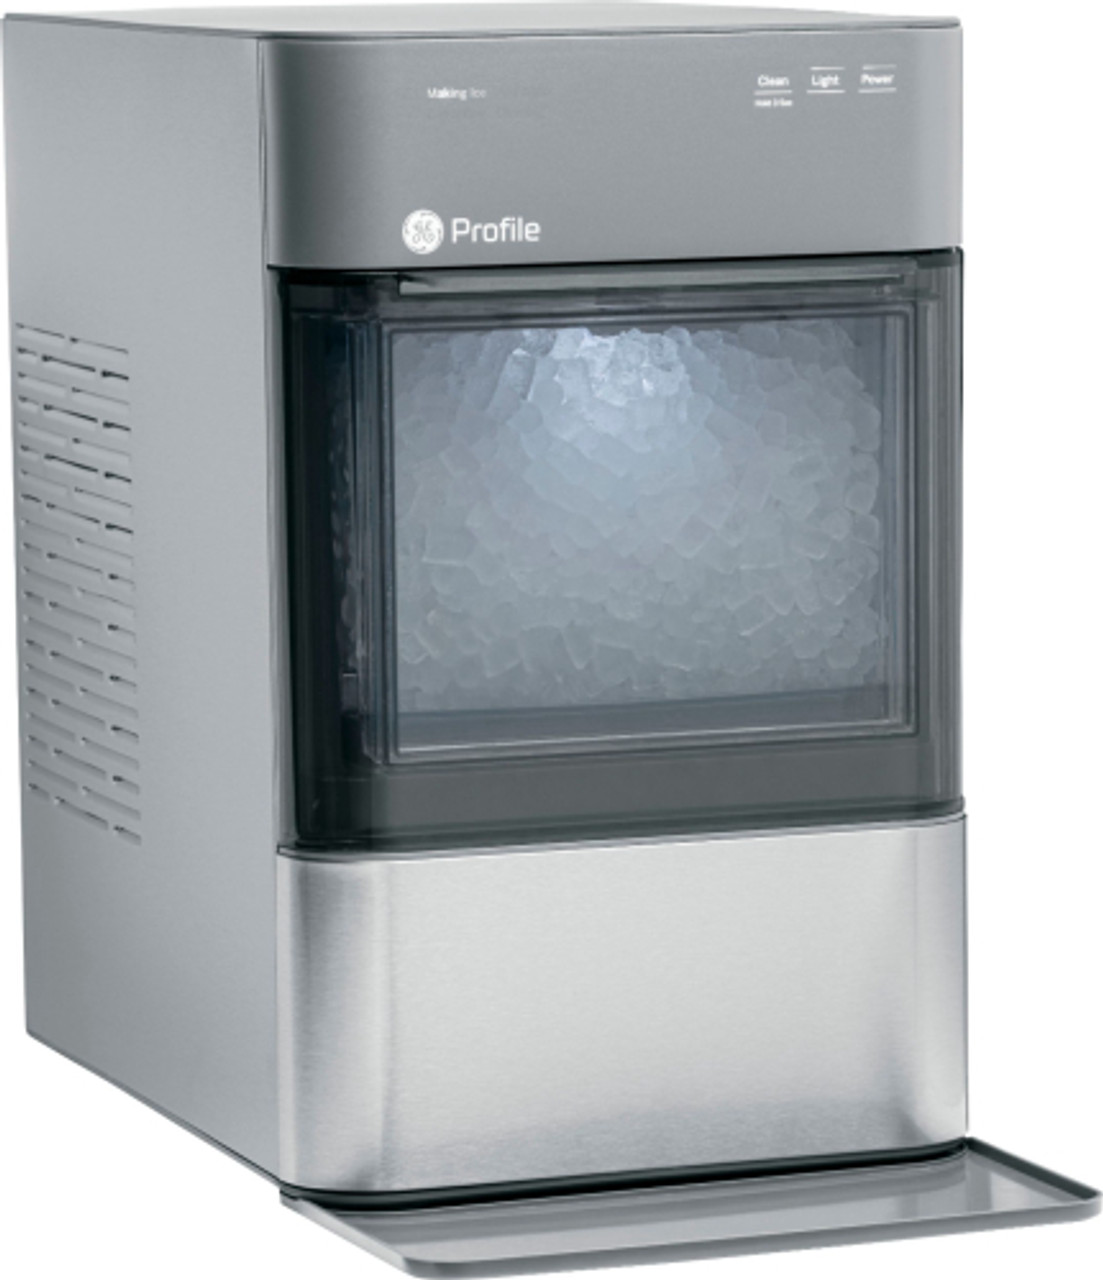 GE Profile - Opal 2.0 24 lb. Freestanding Nugget Ice Maker with Built-In WiFi - Stainless steel